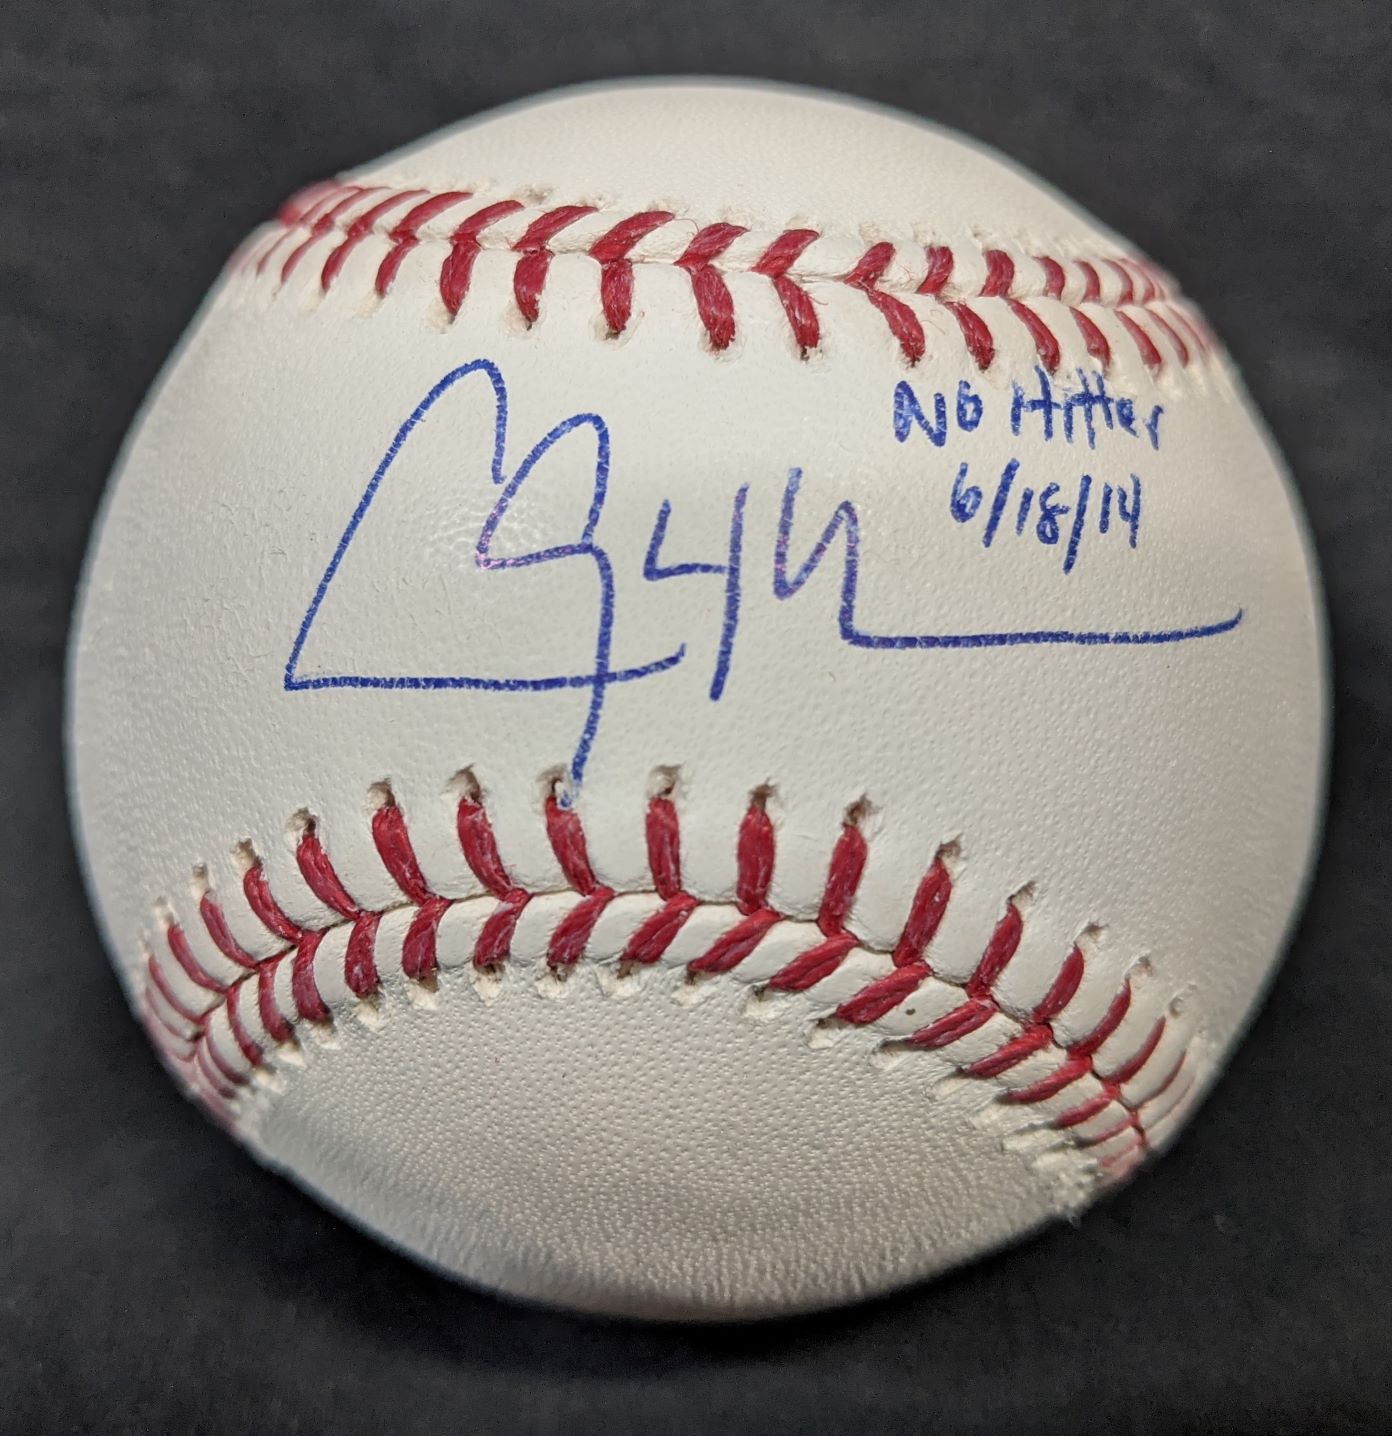 Clayton Kershaw Autographed Ball with No Hitter Inscription